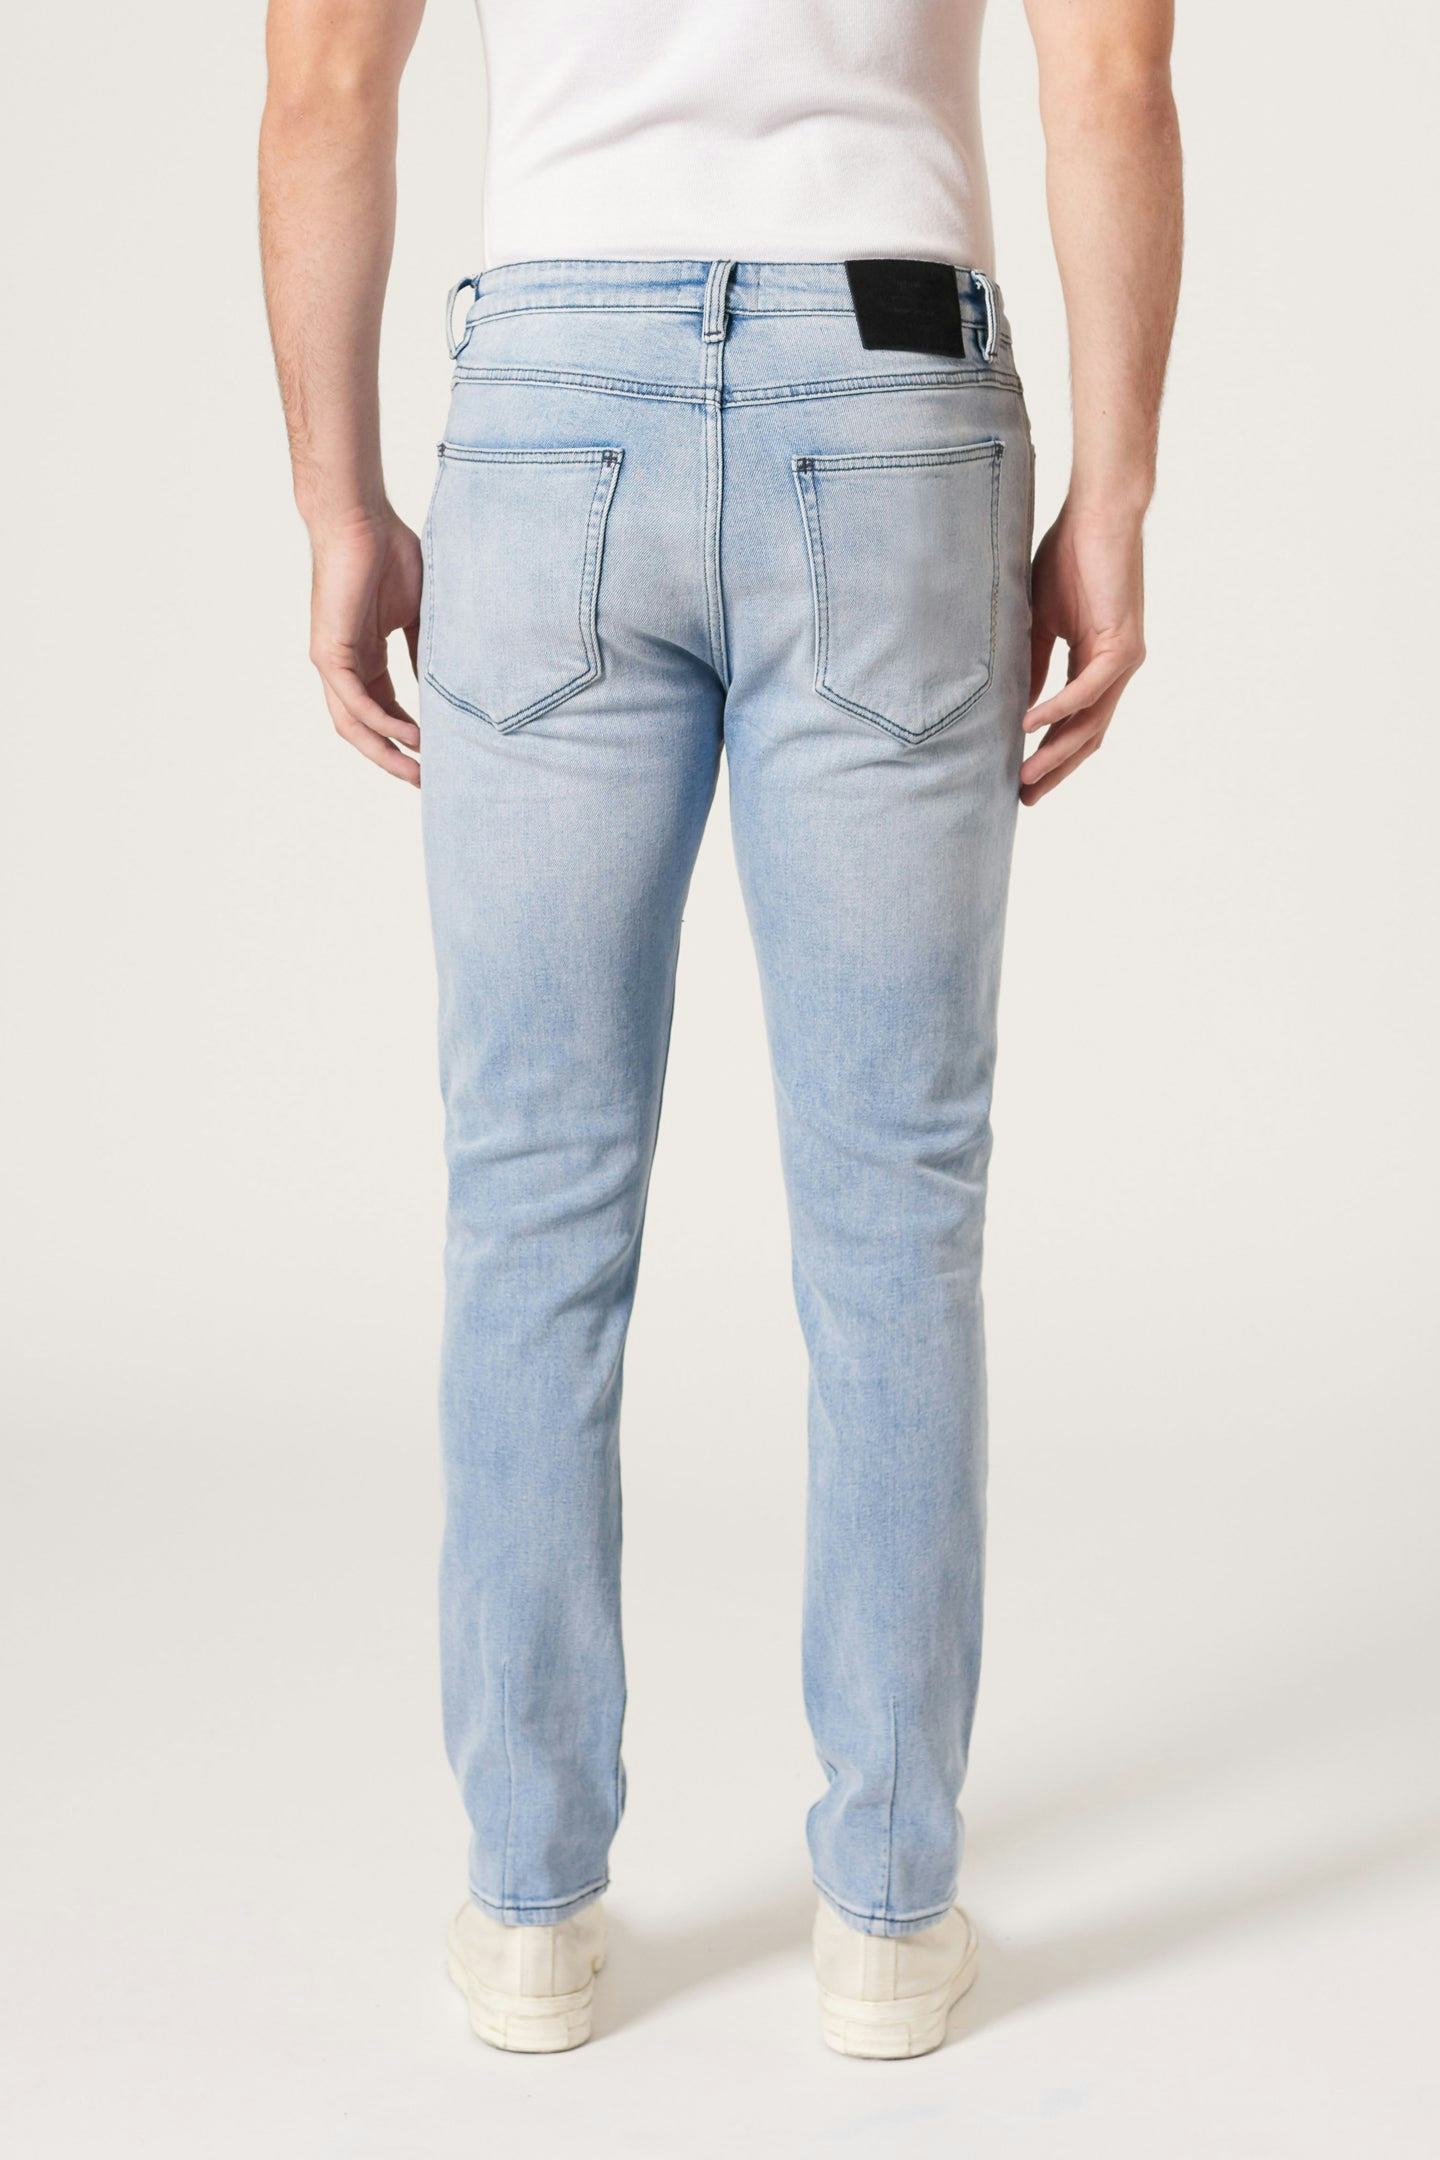 Ray Tapered - Supersonic Neuw light mens-jeans 